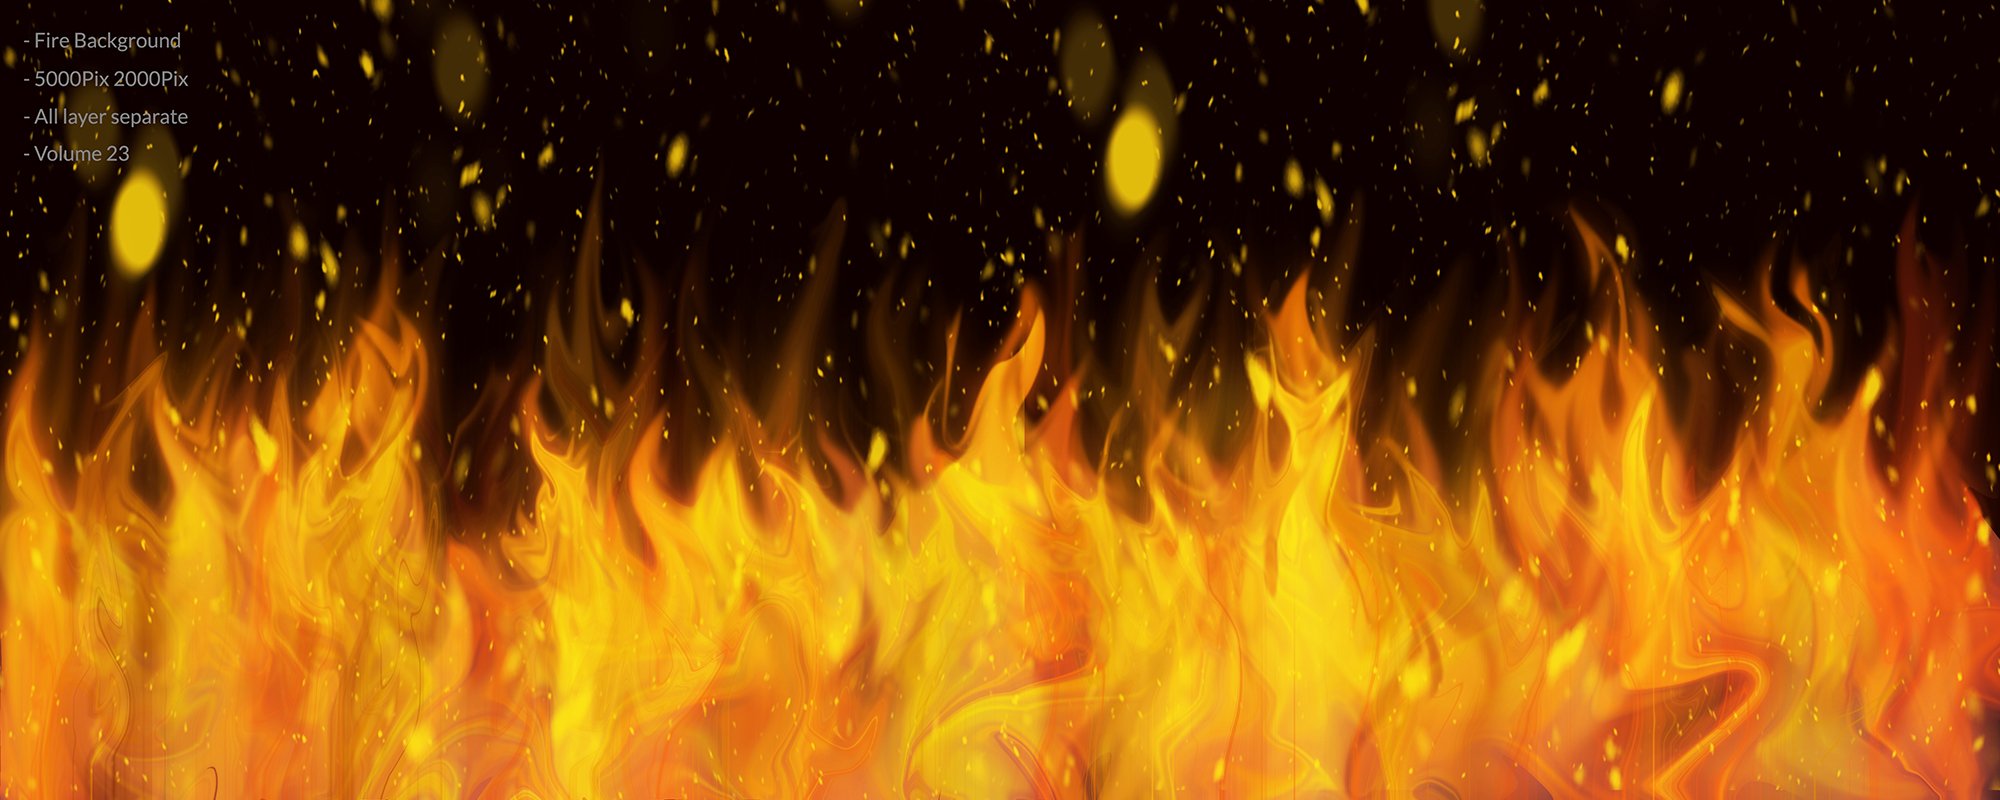 fire background 23 88